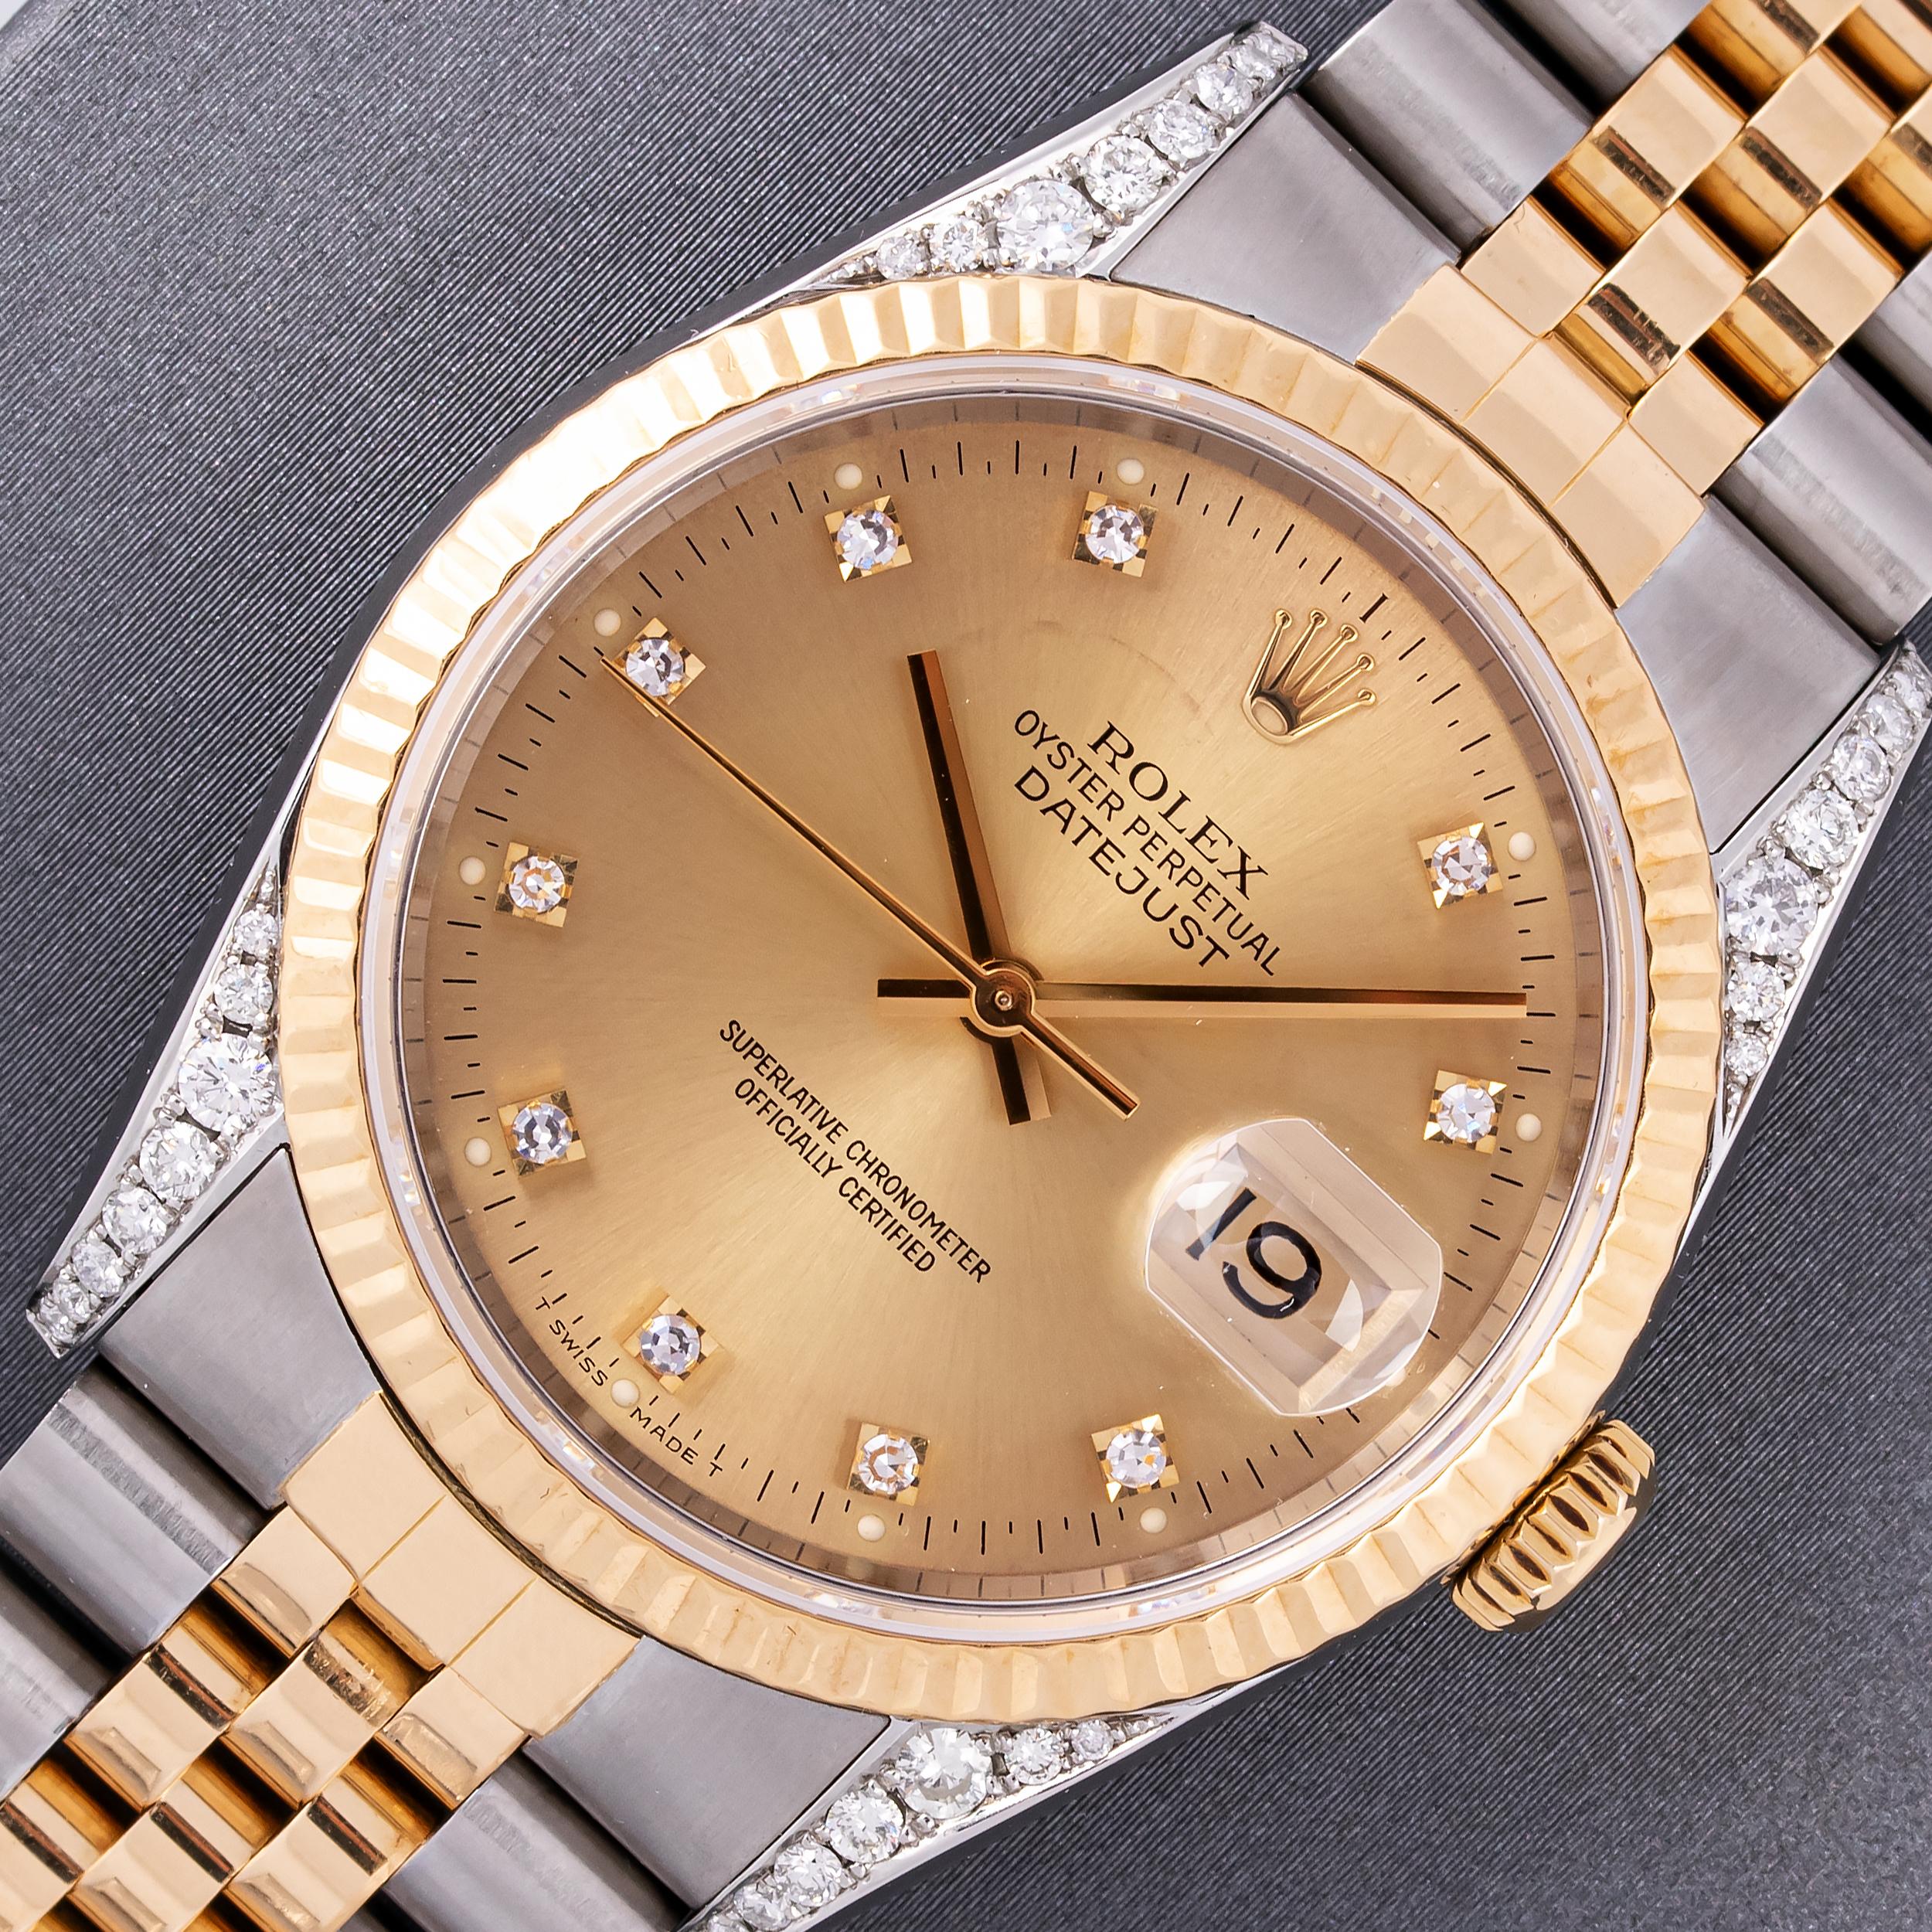 This Preowned Rolex Oyster Perpetual Datejust Has Recently Been Serviced, Polished and Will Be Time Tested Before Shipment. 

DIAL (FACE)

Rolex Champagne Dial with Factory Diamond Hour Markers.
Scratch Resistant Sapphire Crystal with Cyclops